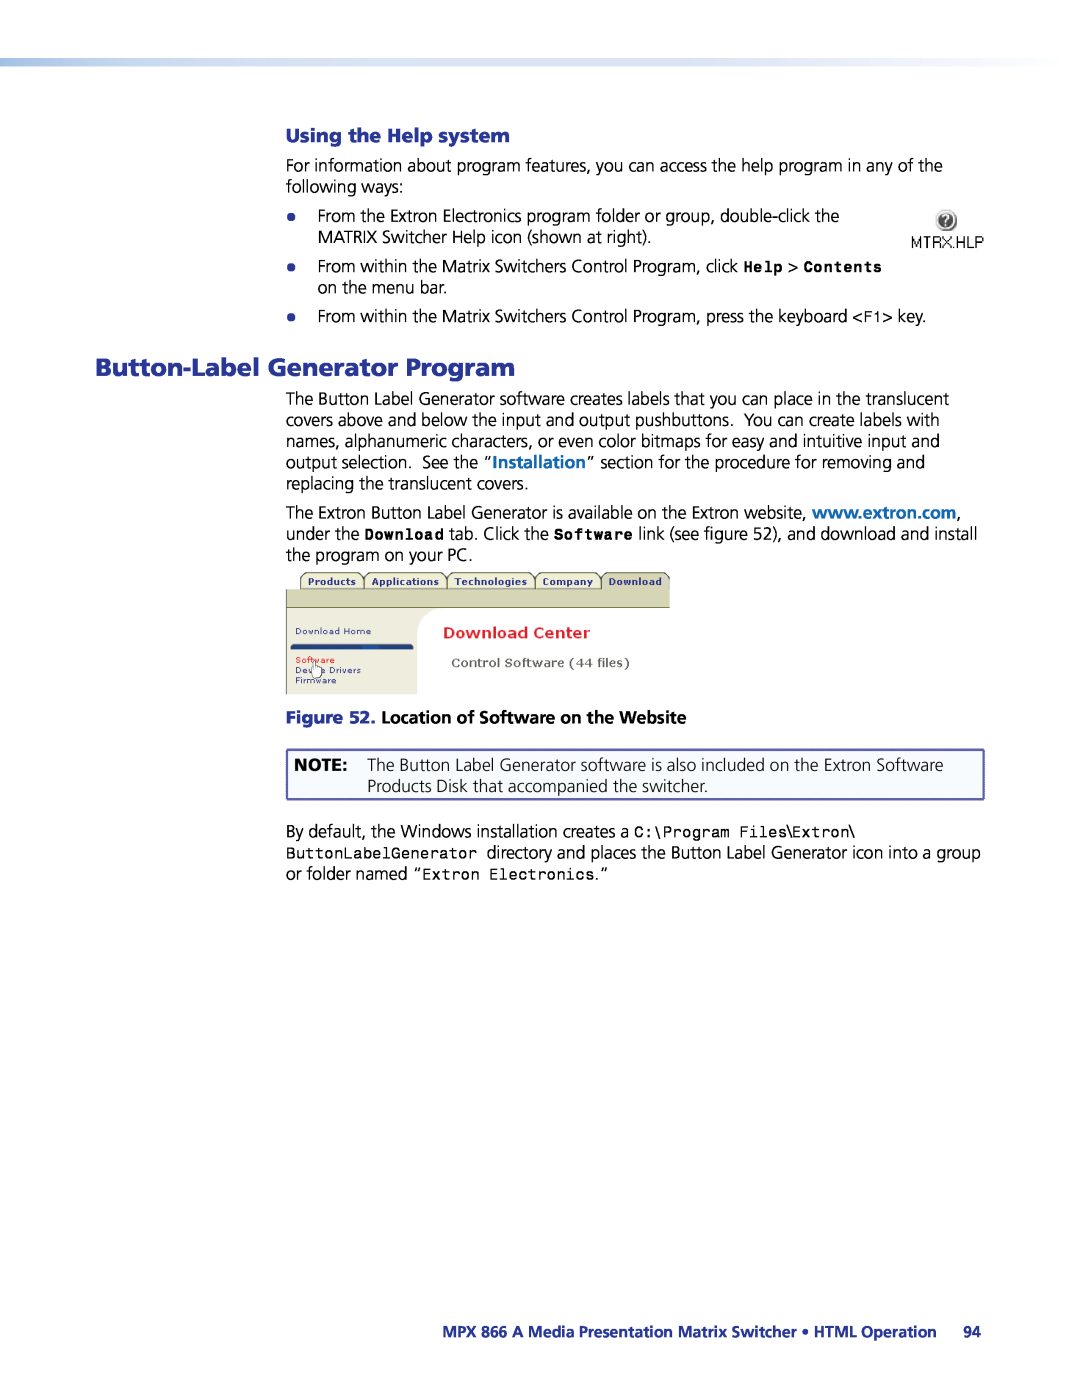 Extron electronic MPX 866 A Button-Label Generator Program, Using the Help system, Location of Software on the Website 